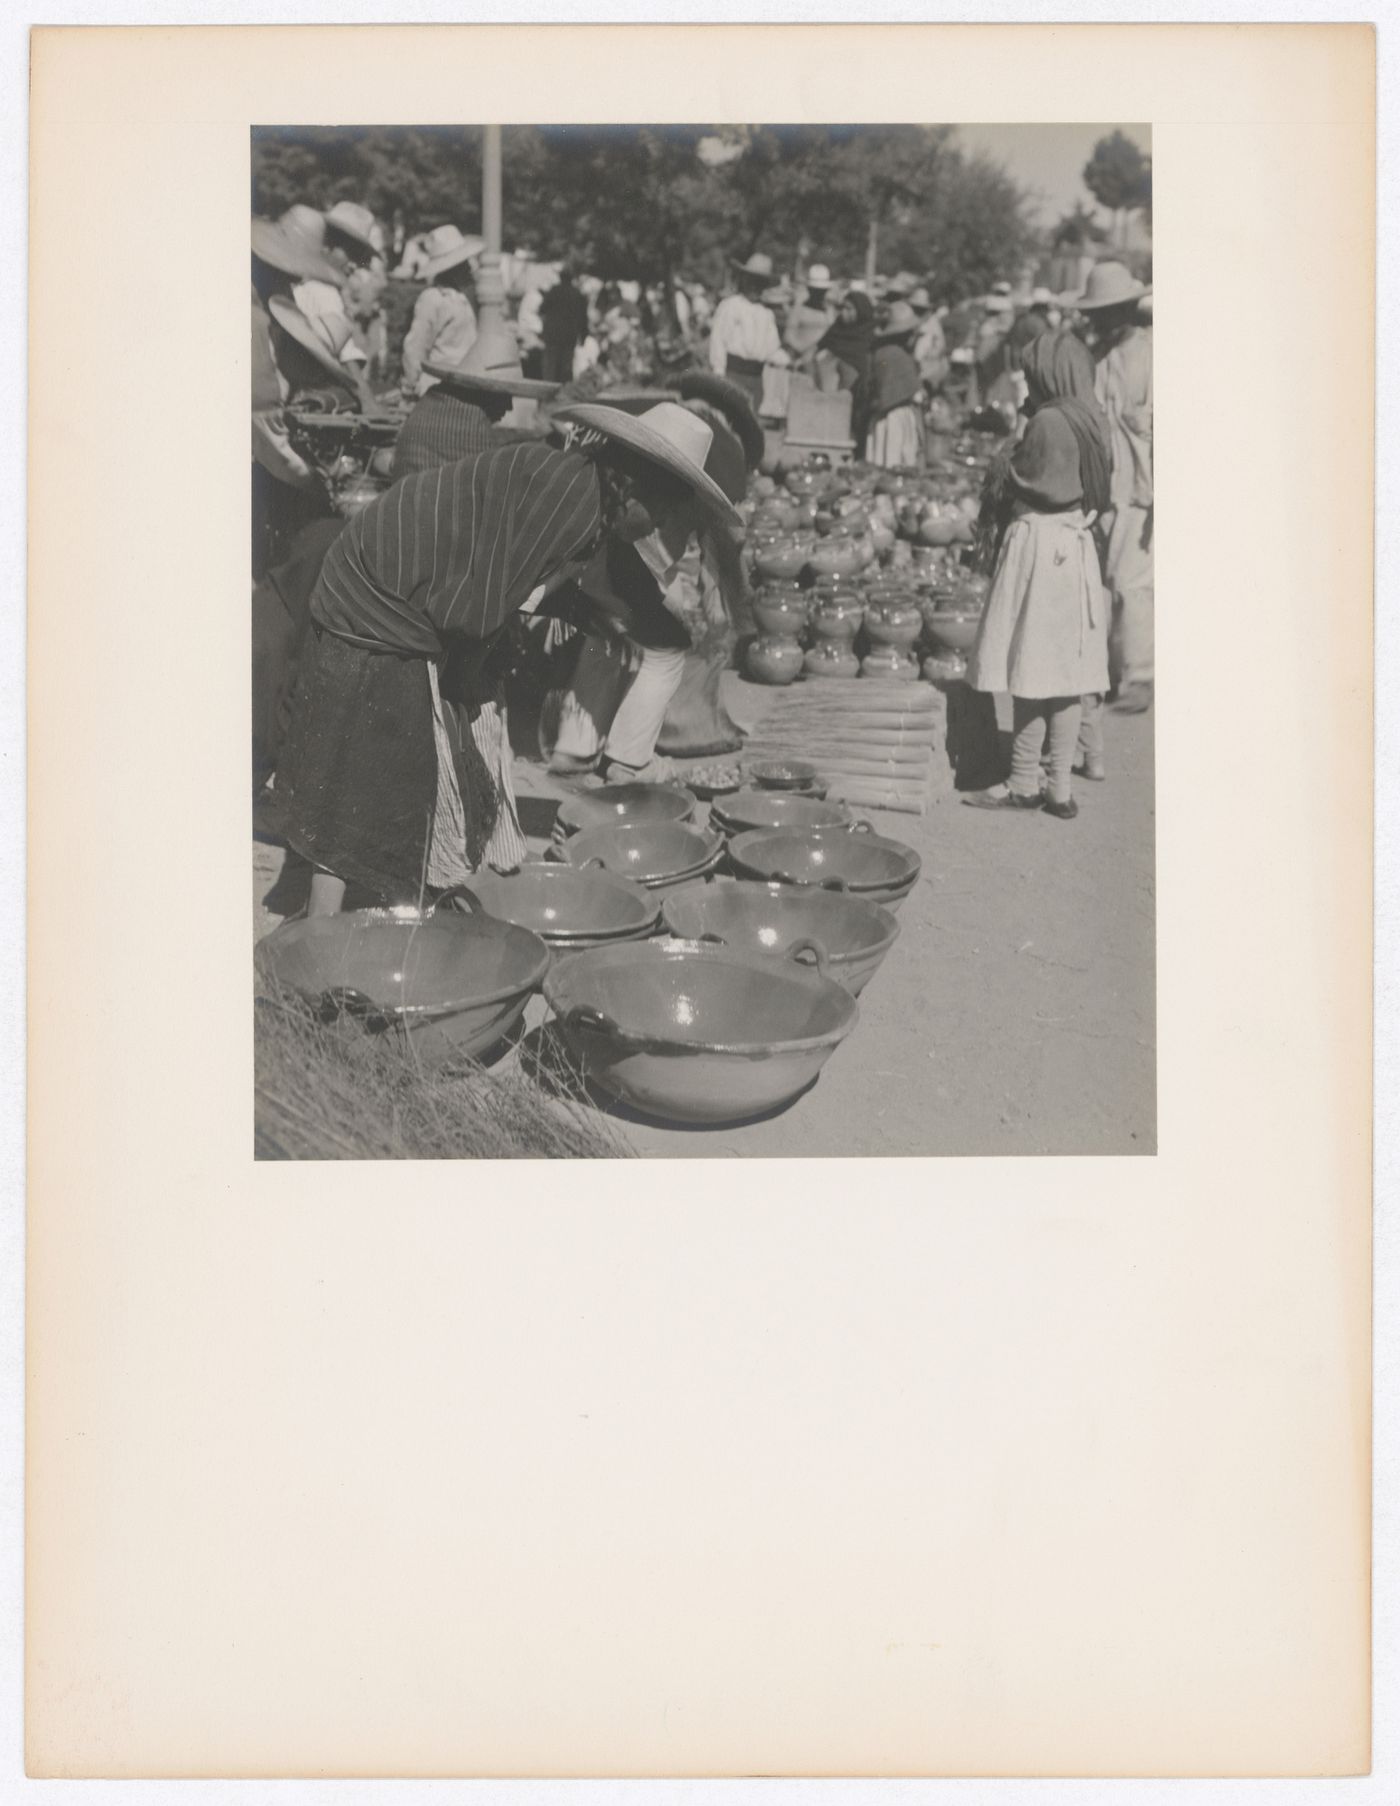 View of a market showing dishes and people, Mexico